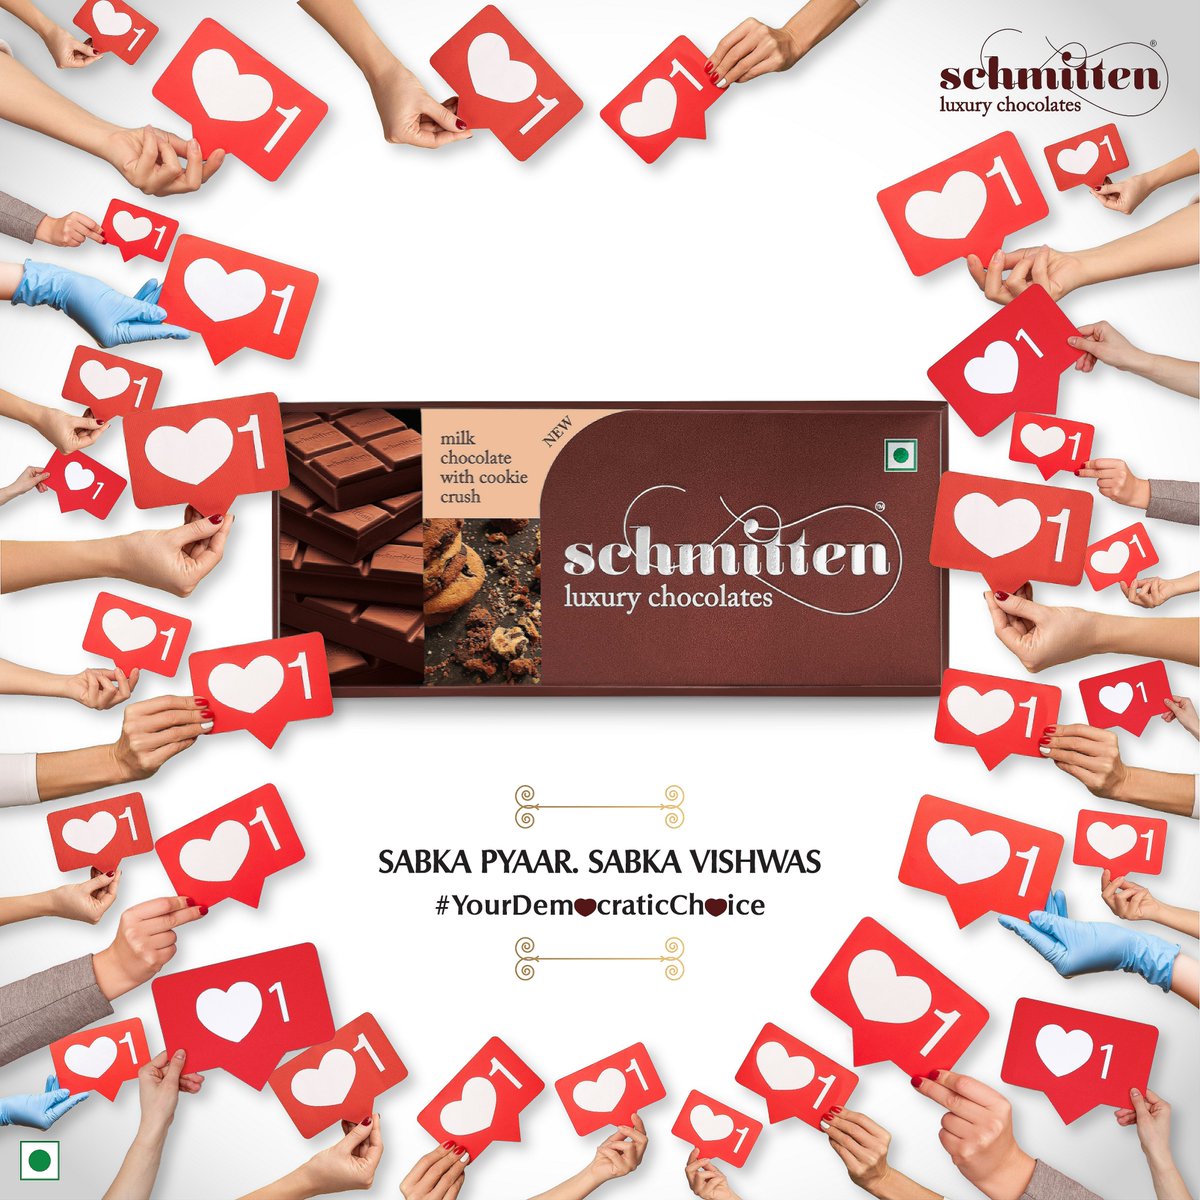 Schmitten: Where Indulgence Meets Excellence! 🍫✨Schmitten emerges as the leader of taste and satisfaction. Join the Schmitten revolution and experience the ultimate chocolate fantasy!

#Schmitten #SchmittenChocolates #YourDemocraticChoice #LuxuryChocolates